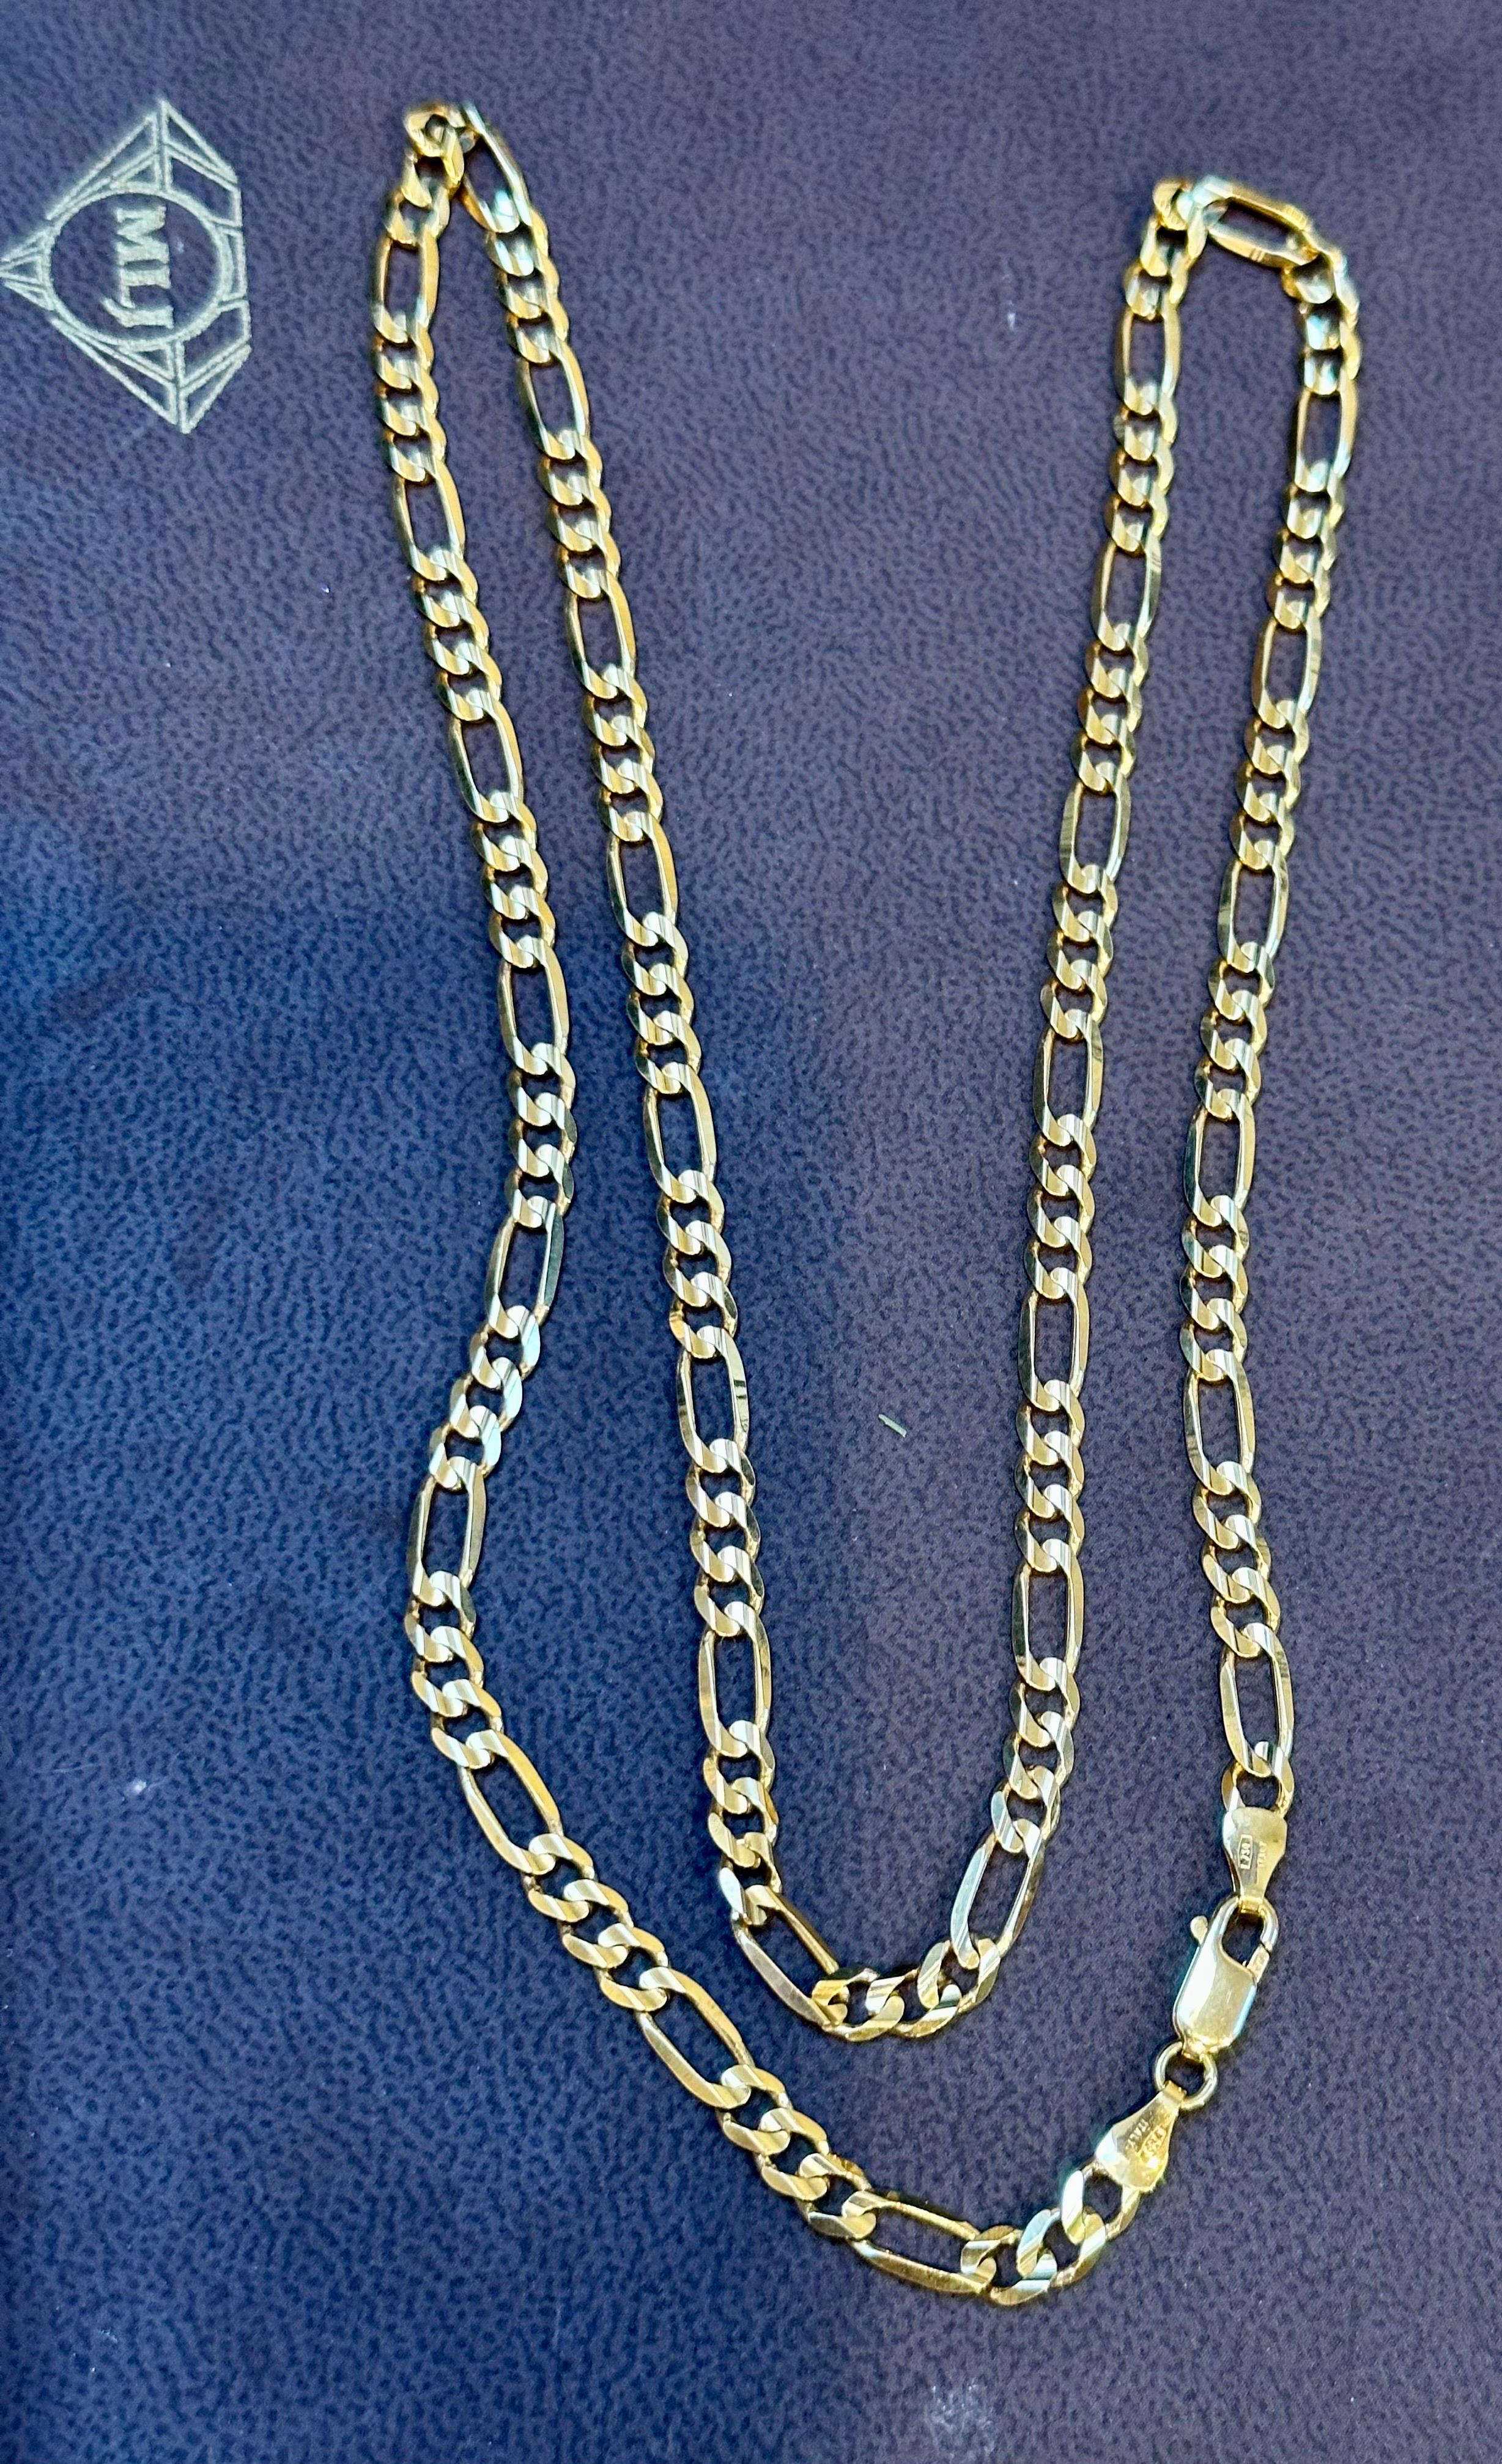 Vintage 18 Karat Yellow Gold 20 Gm Figaro Chain Necklace, Made in Italy 3